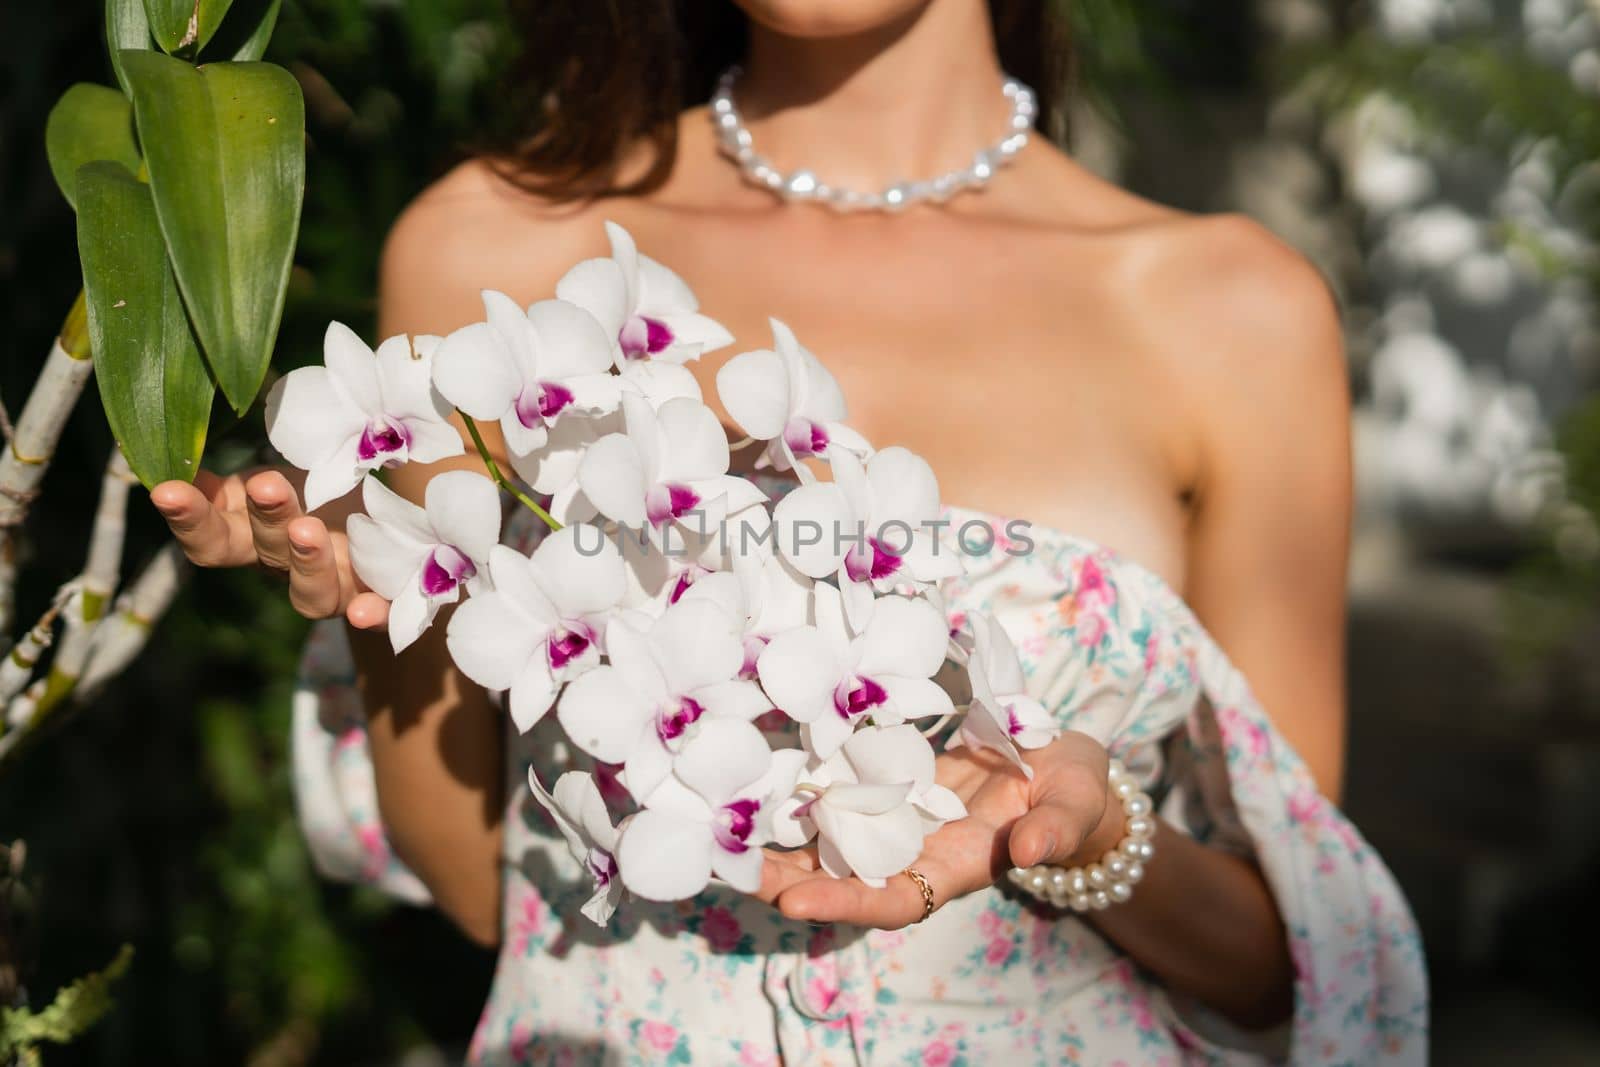 Young beautiful woman in a romantic dress with a floral print, and a pearl necklace bracelet, a close shot of hands and flowers